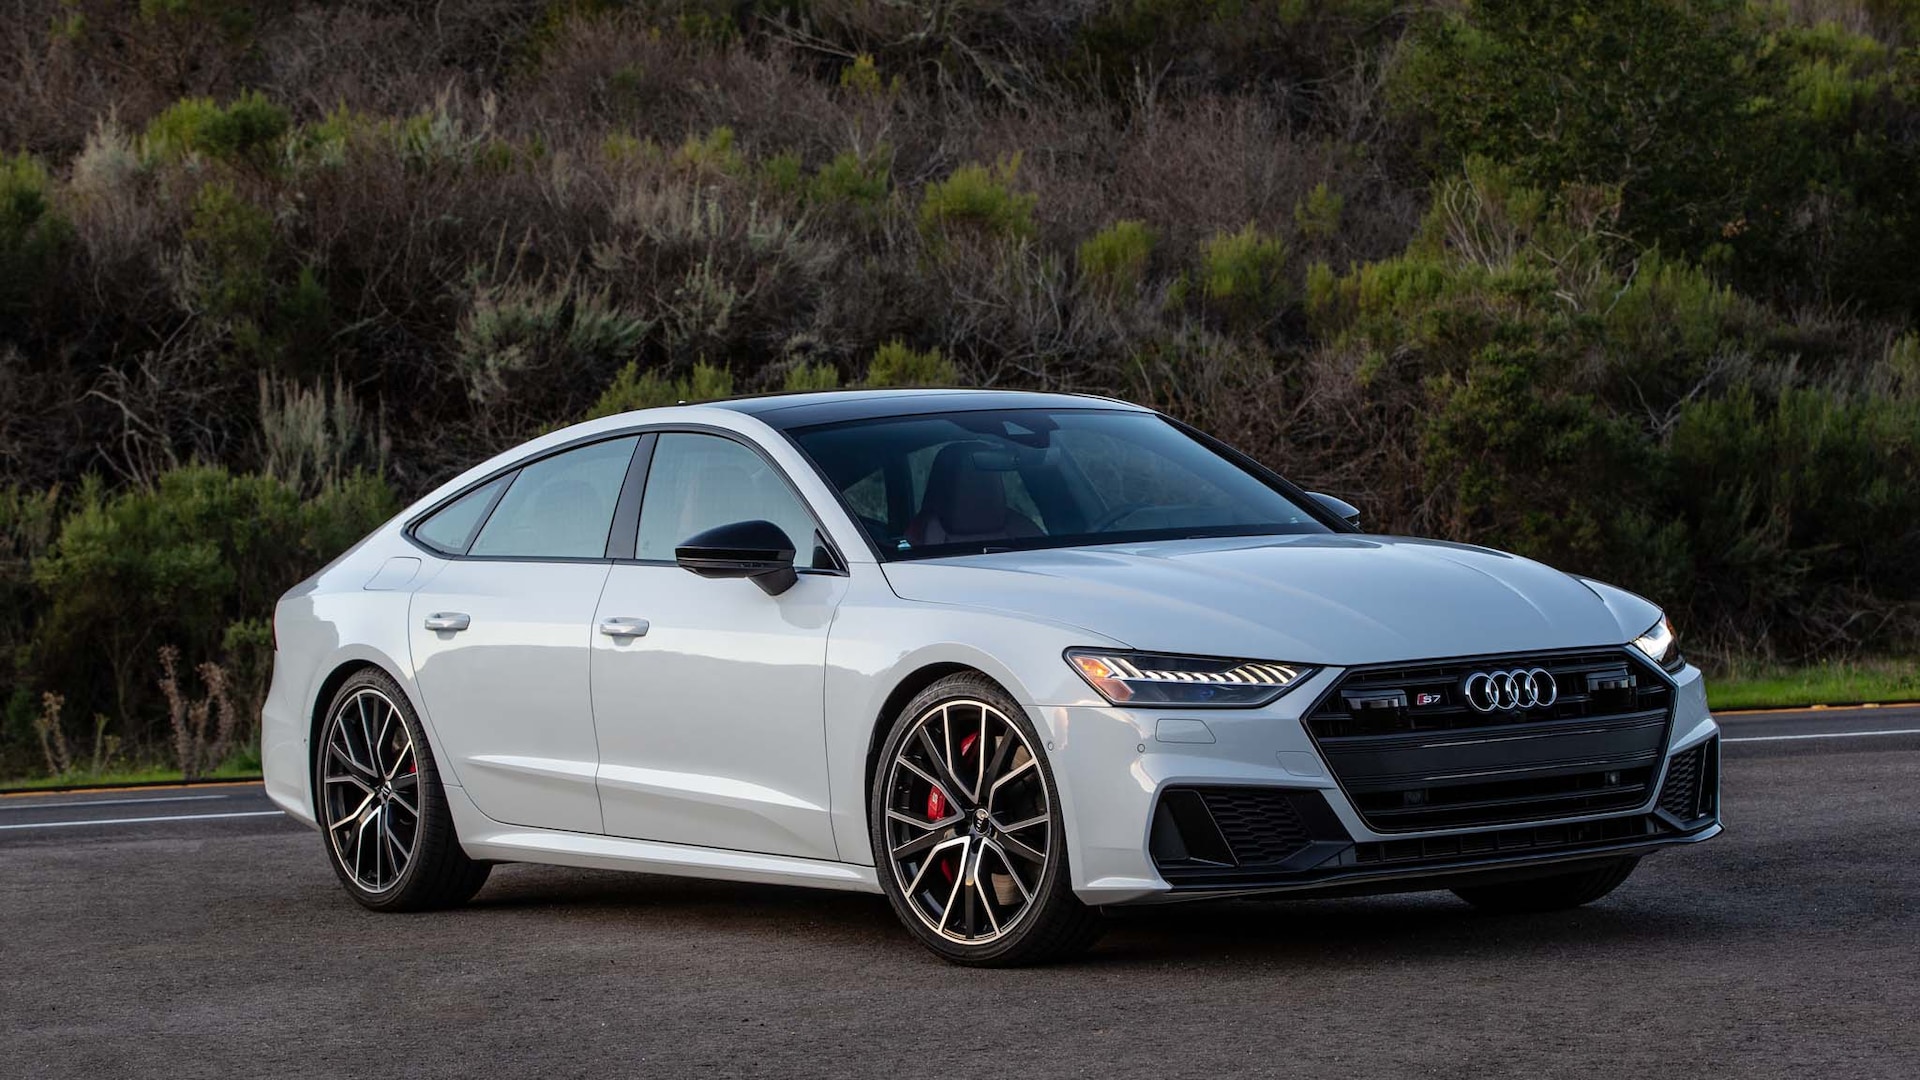 2020 Audi S7 Prices, Reviews, and Photos - MotorTrend